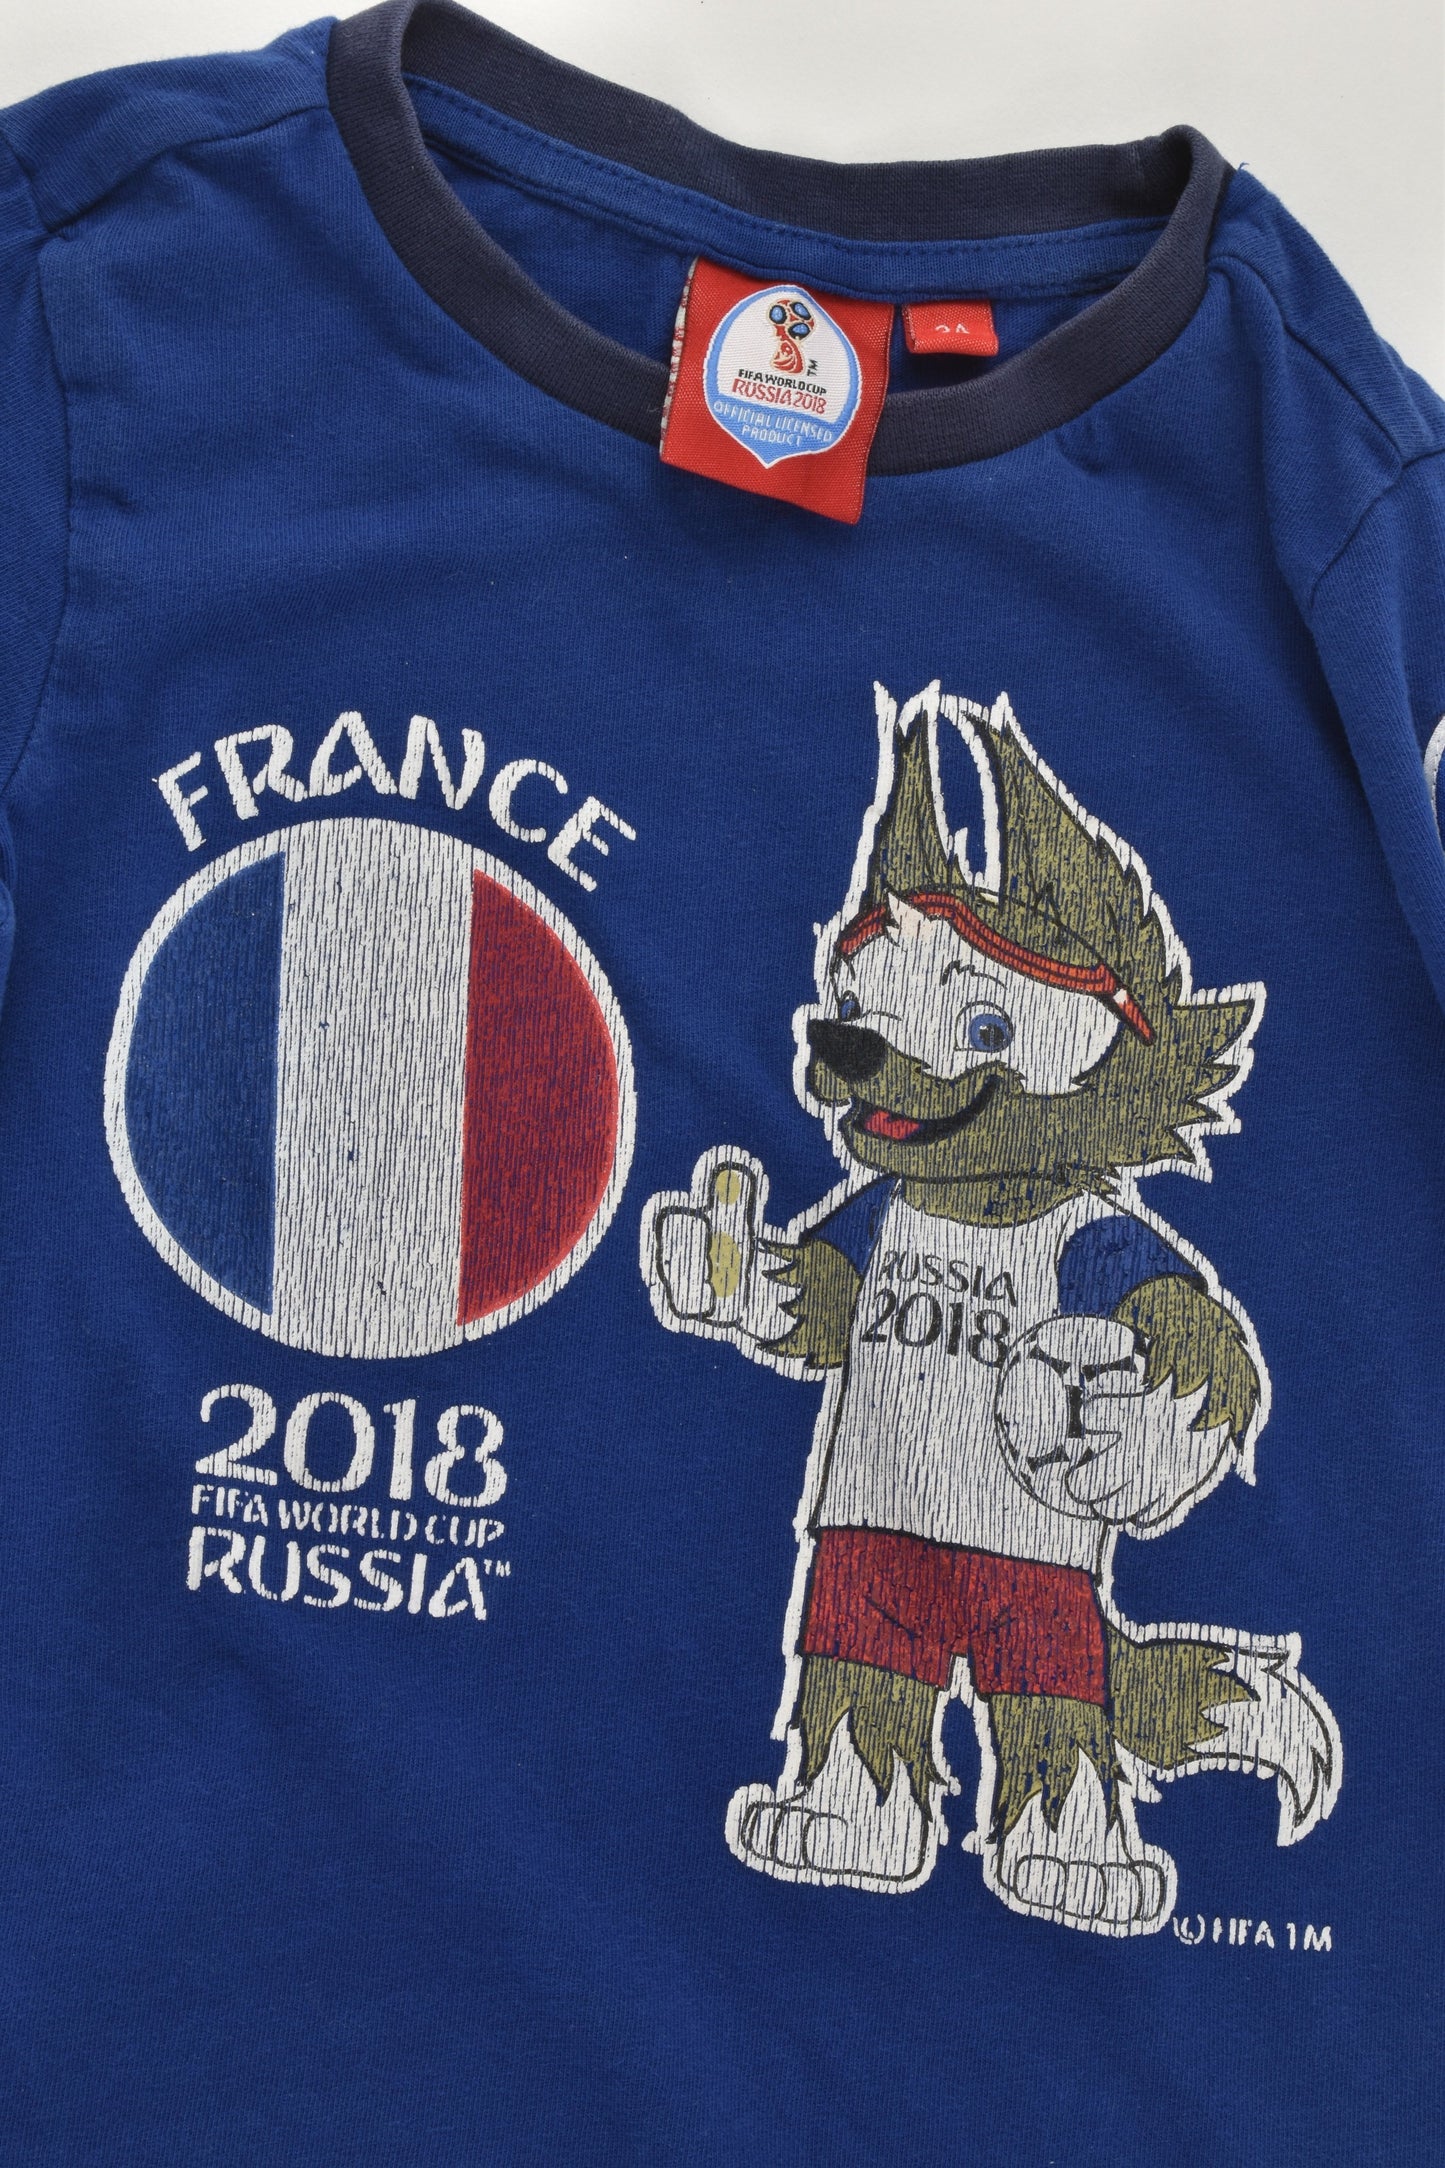 FIFA Worldcup Russia 2018 Size 3 (98 cm) France T-shirt